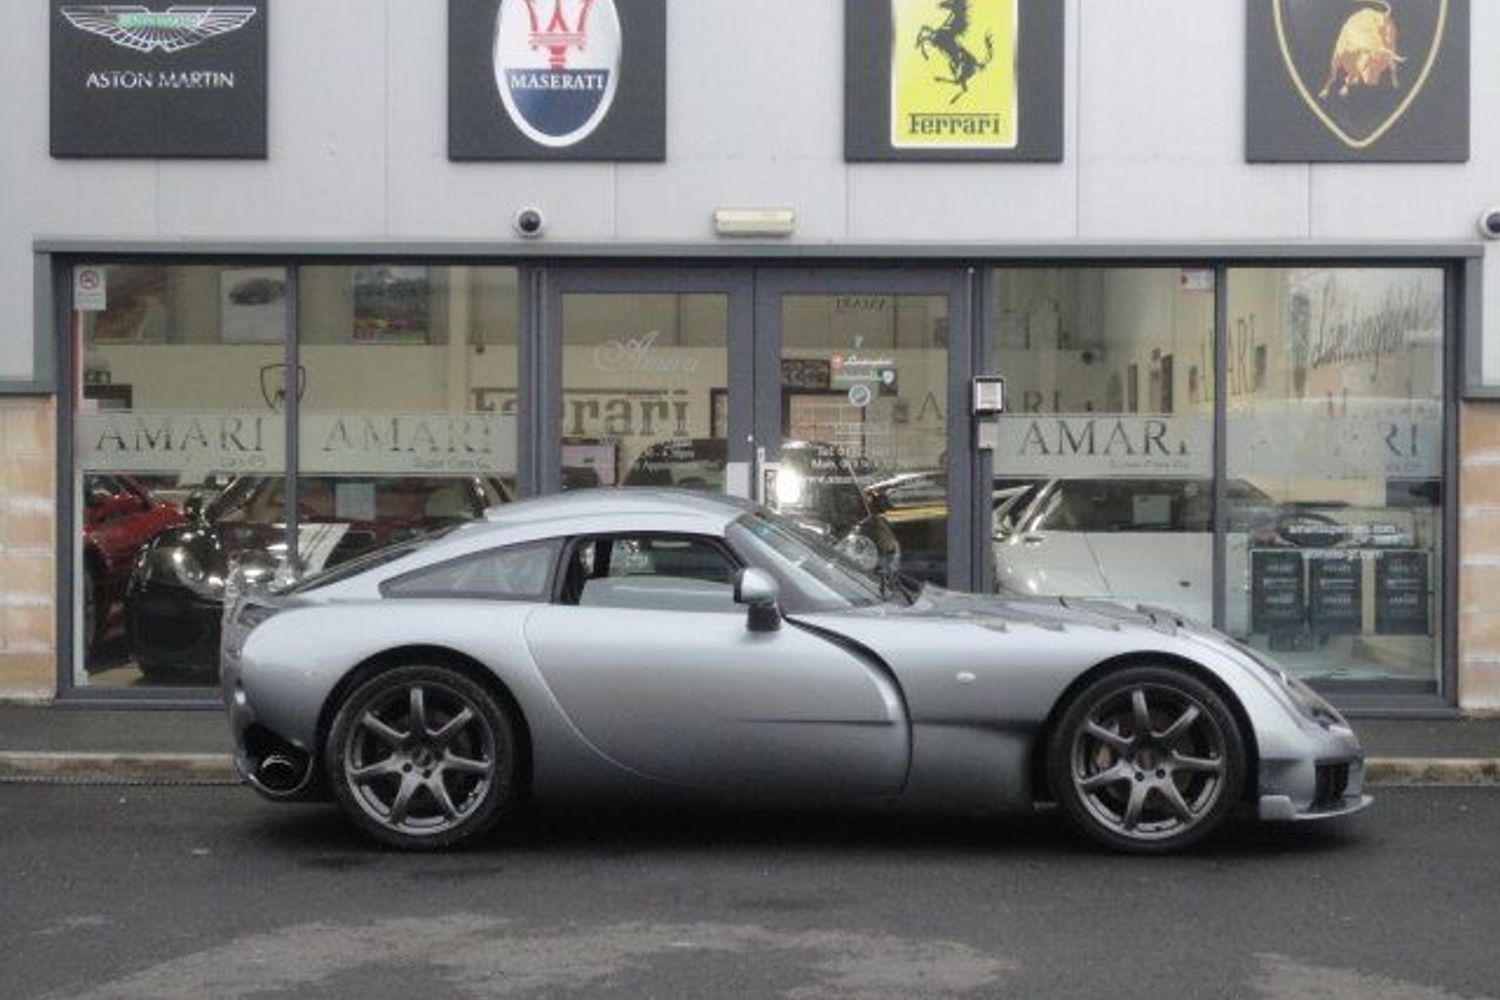 TVR Sagaris (Straight-six Sagaris is the extreme face of TVR)